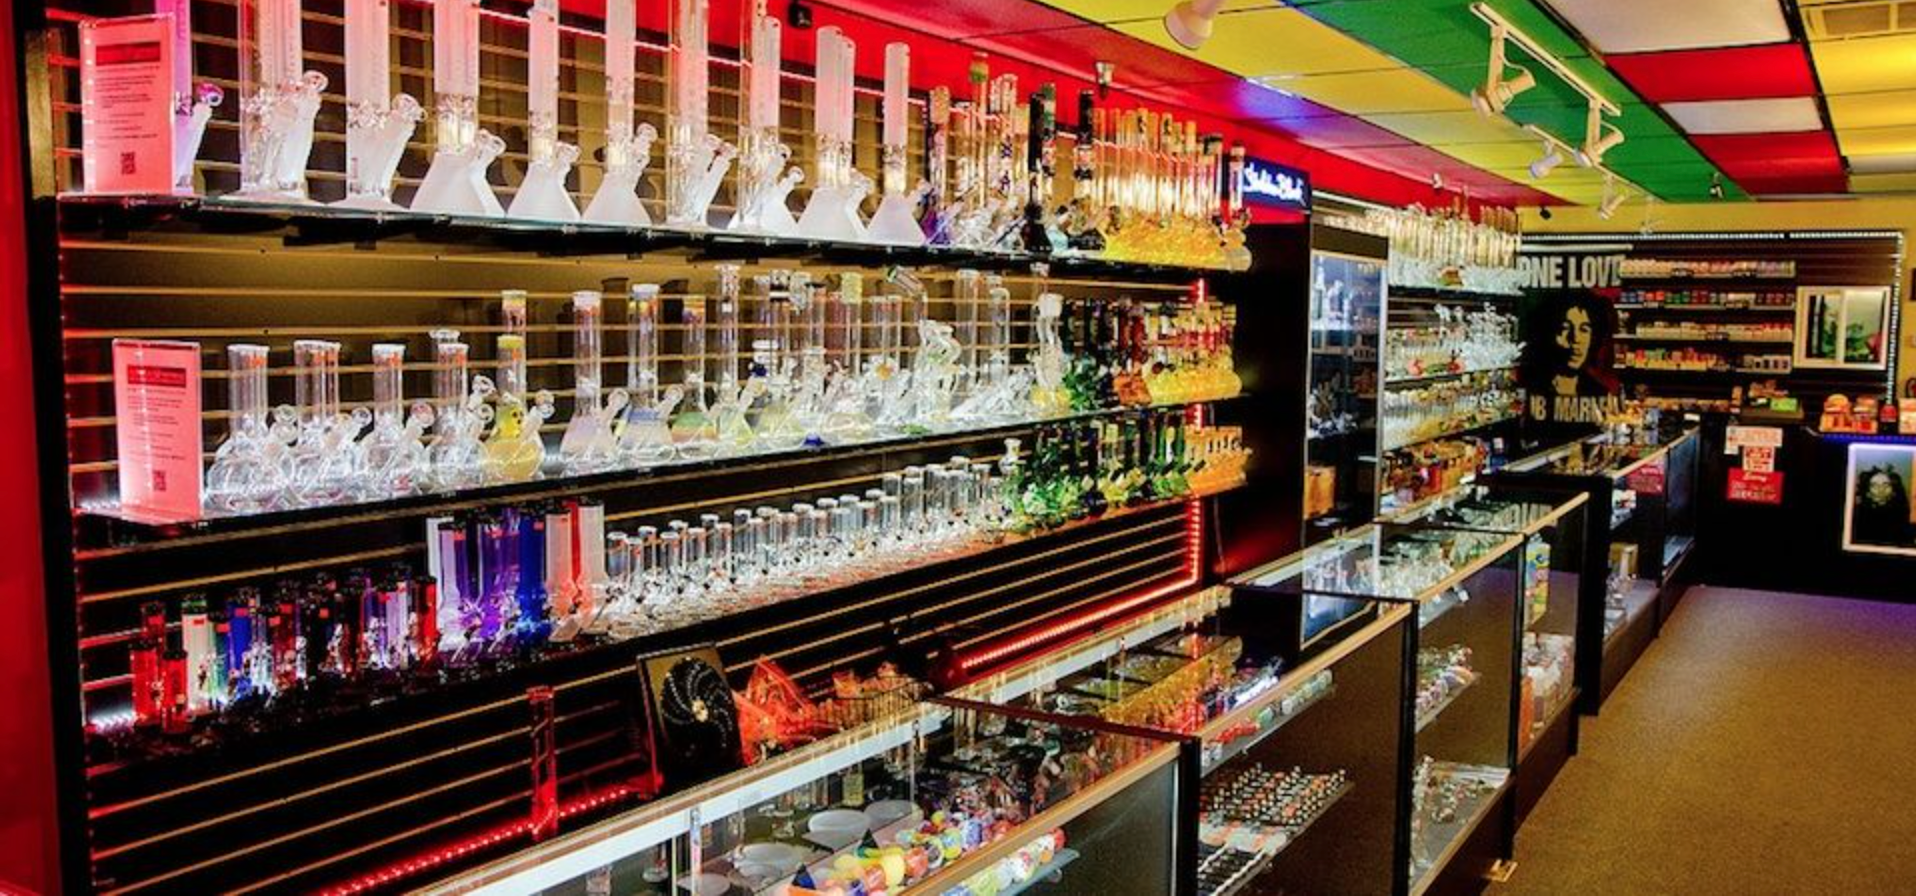 Wholesale Smoke Shop showing a really cool retail location with Bongs and Glass Pipes.  Our unique approach, market share of imports, and ability to blow our own glass, gives us the ability to supply your store with bulk pipes, water pipes, and dab rigs